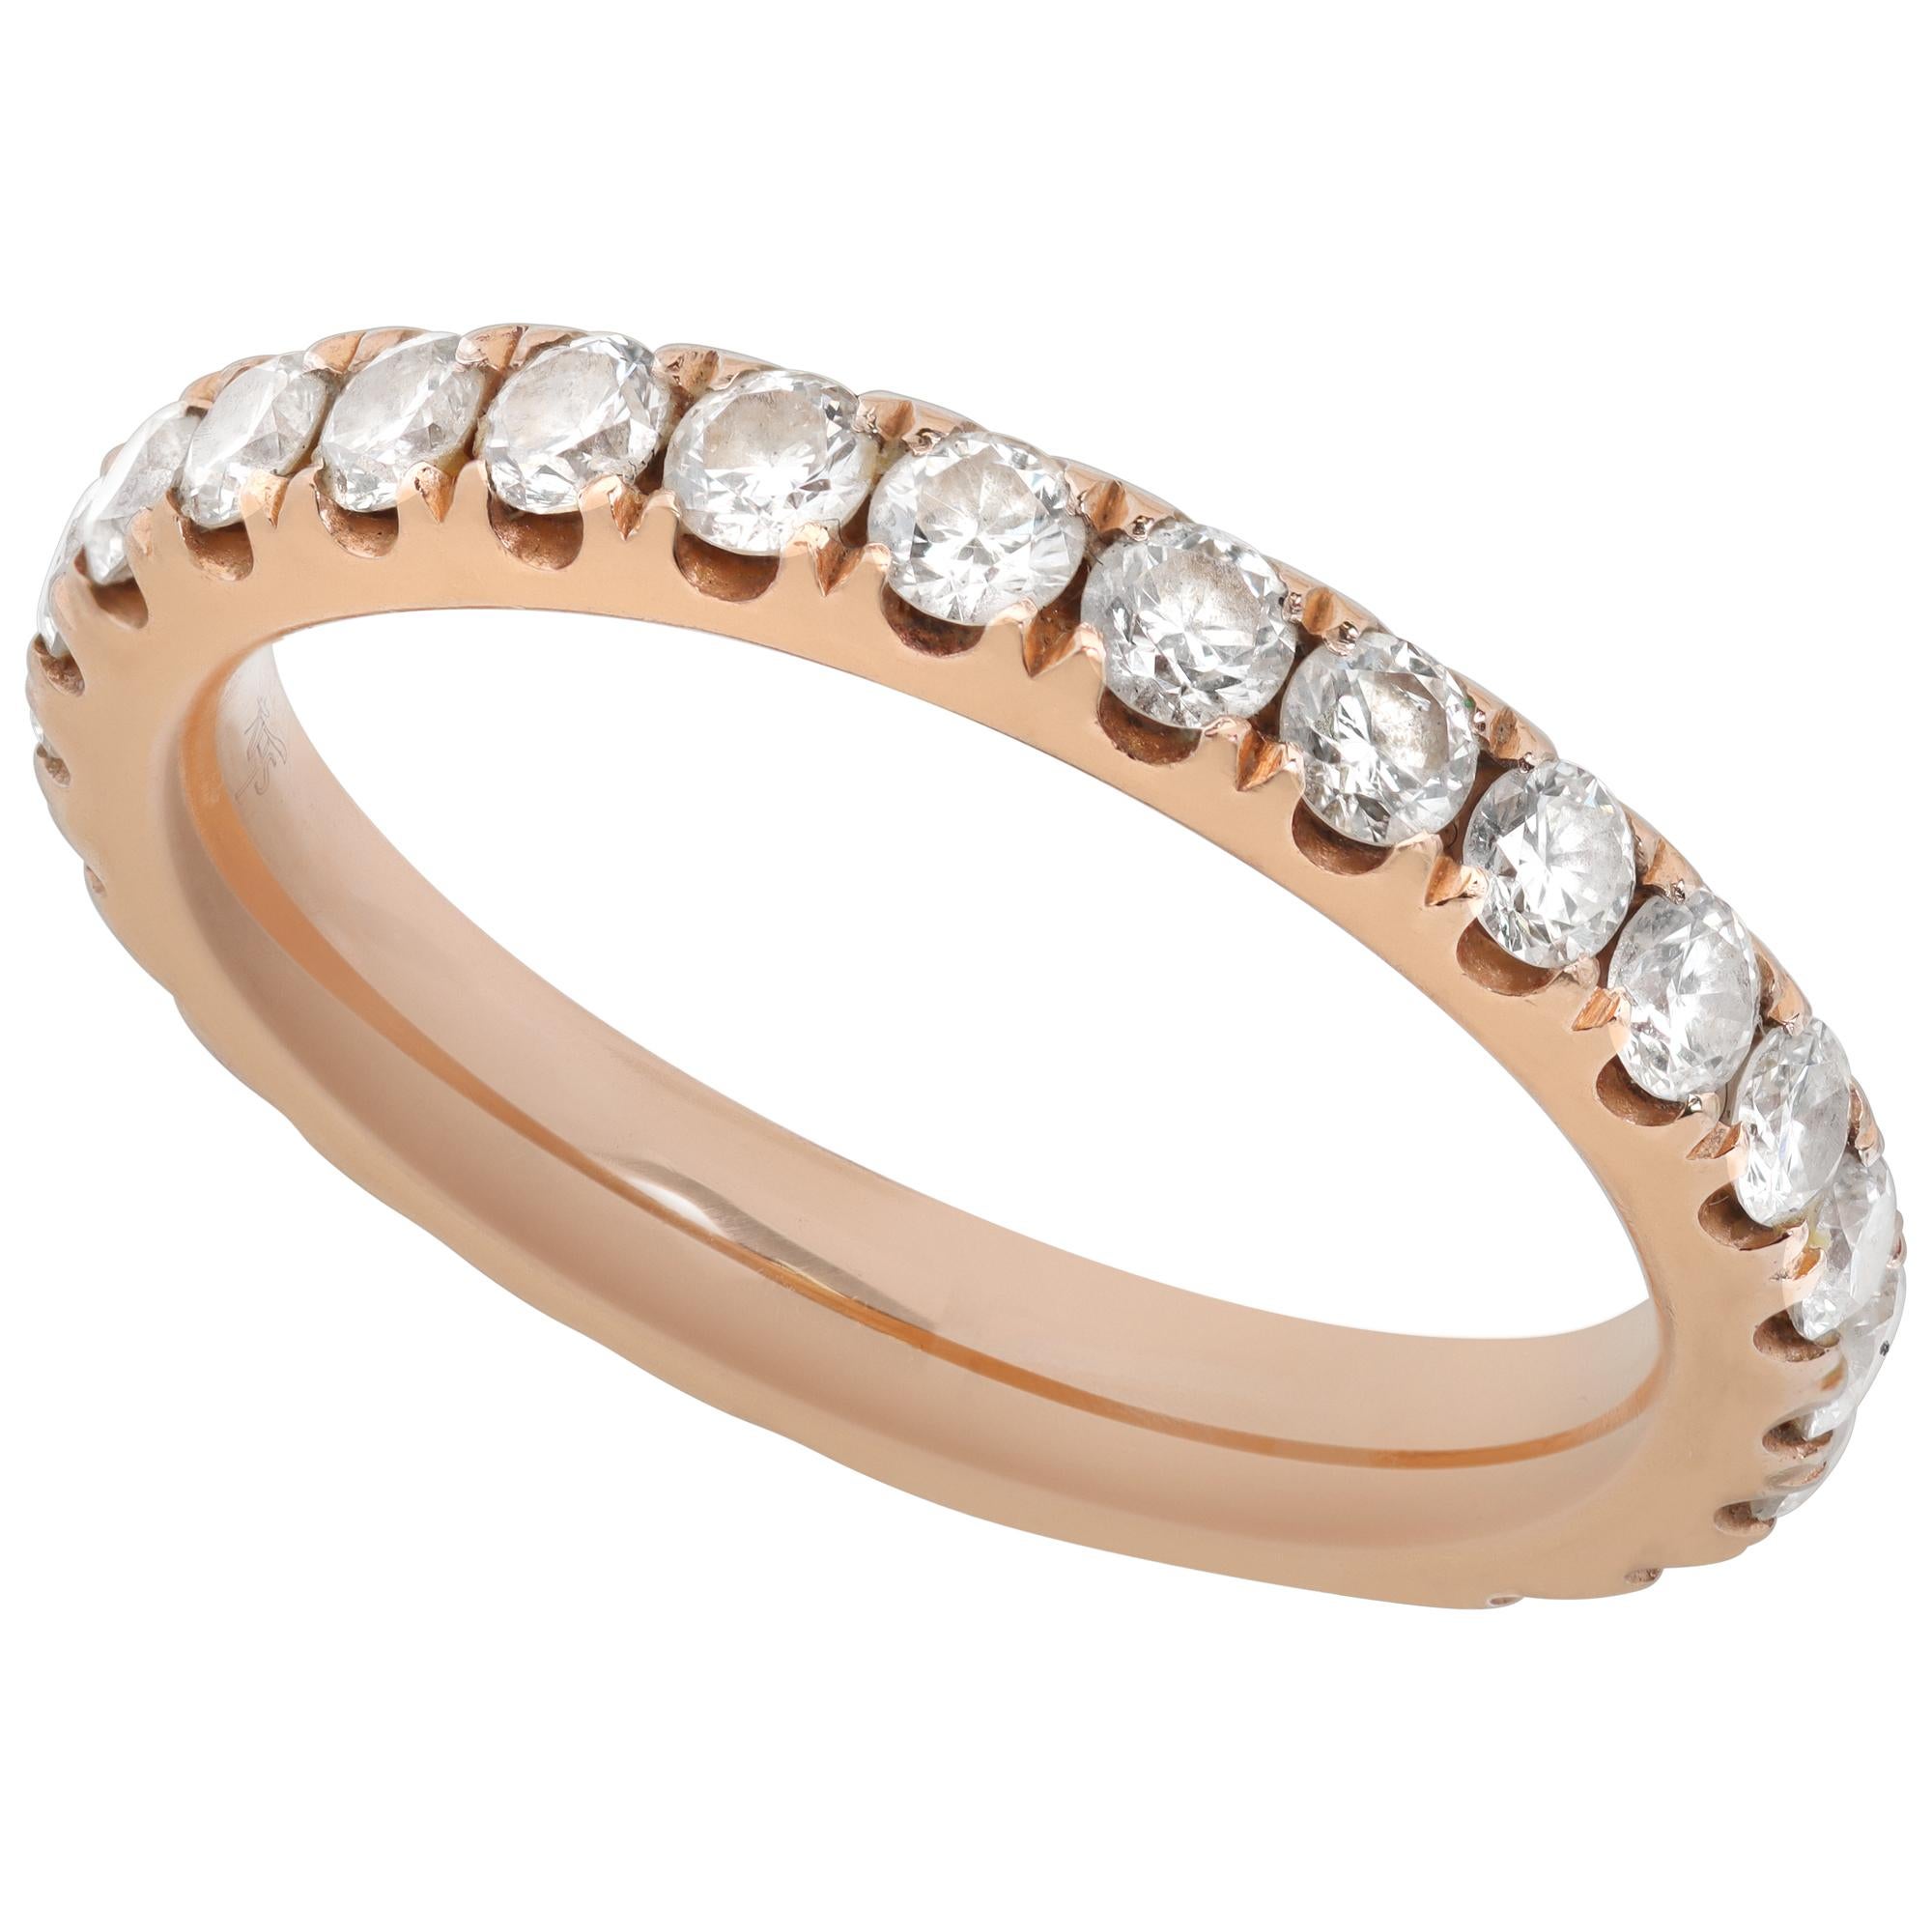 Diamond 14k rose gold eternity band In Excellent Condition For Sale In Surfside, FL